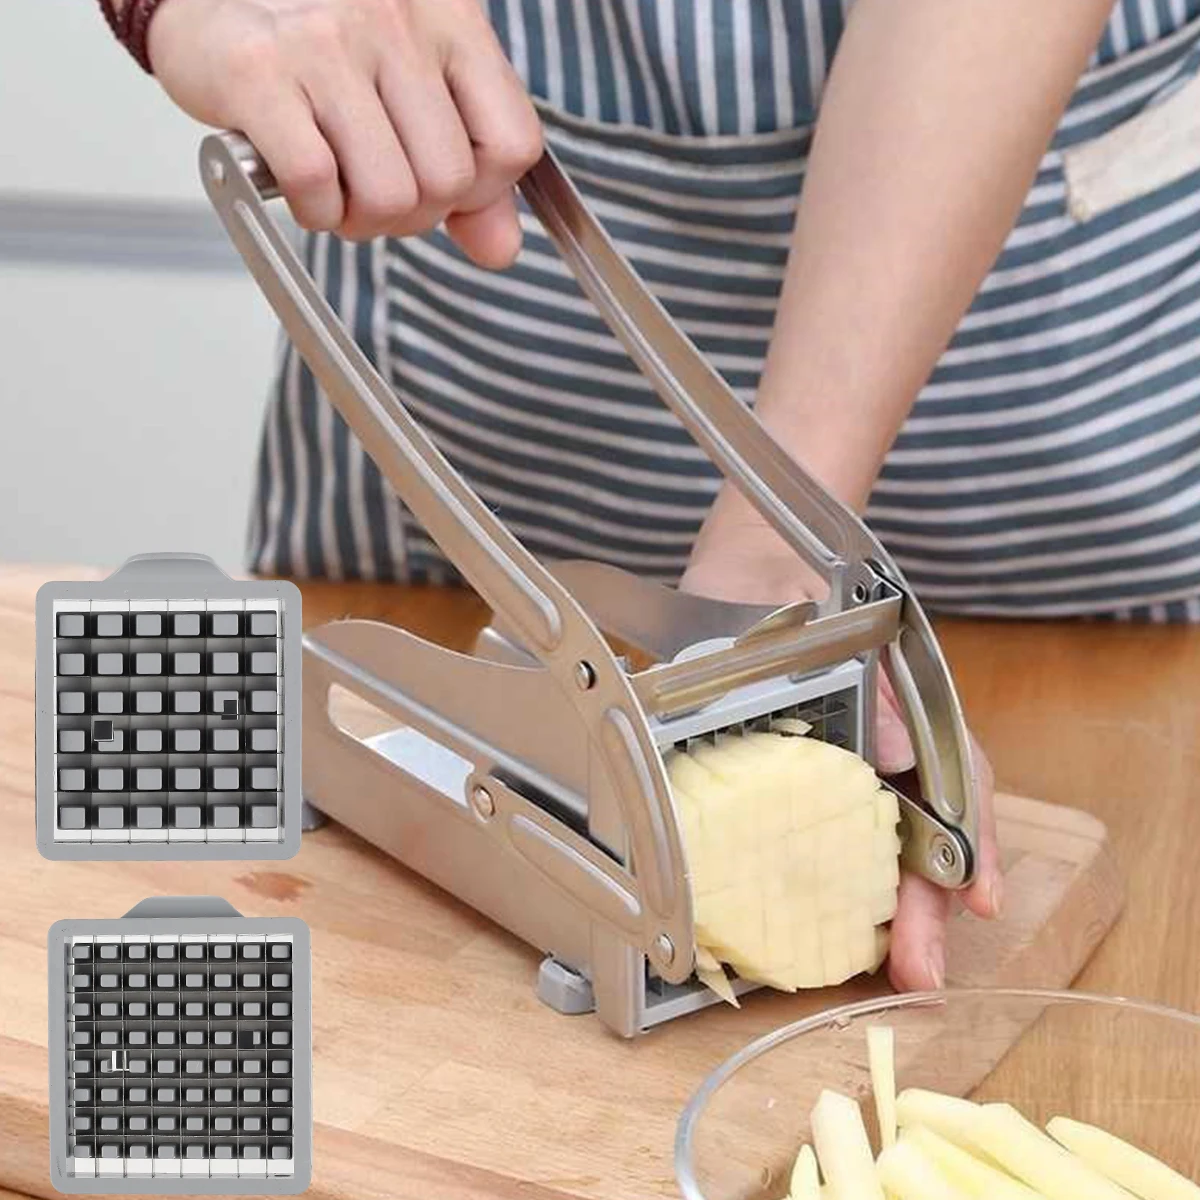 https://ae01.alicdn.com/kf/S47c094e117834345a43c3734bdba8623g/Potato-Slicer-Multifunction-Vegetable-Fruit-Chopper-with-2-Stainless-Steel-Blades-for-Tomato-Potato-Cooking-Slicer.jpg